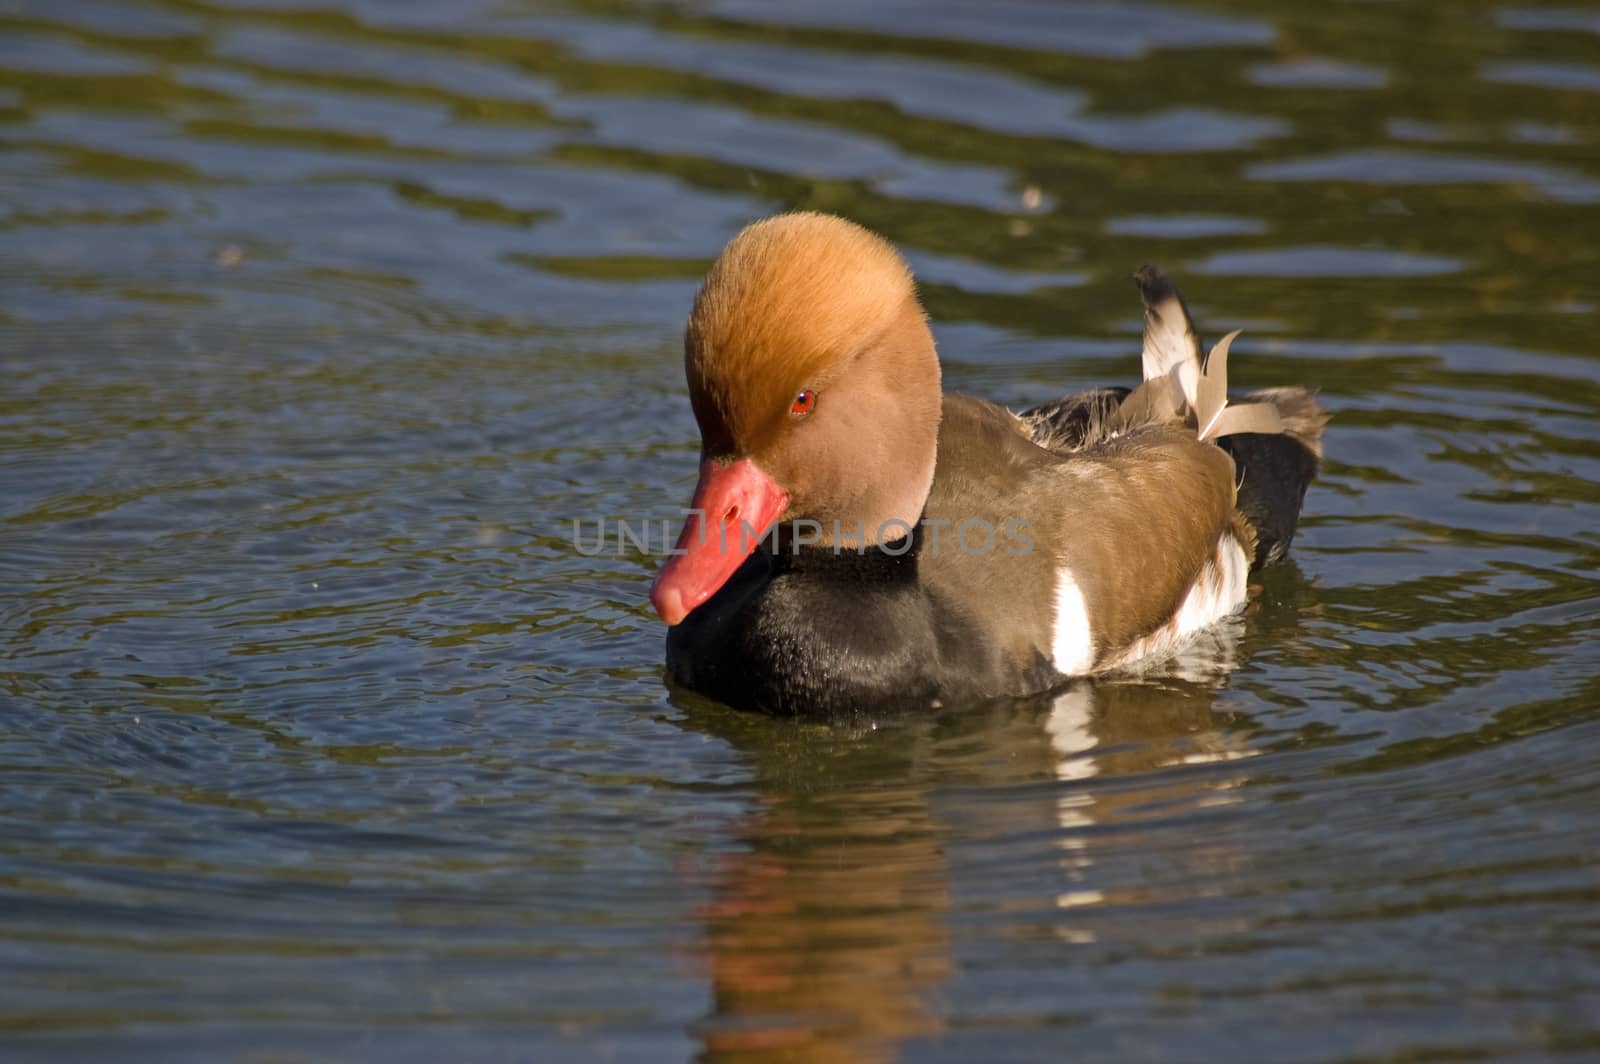 Red Crested Pochard Duck swimming on pond by BasPhoto